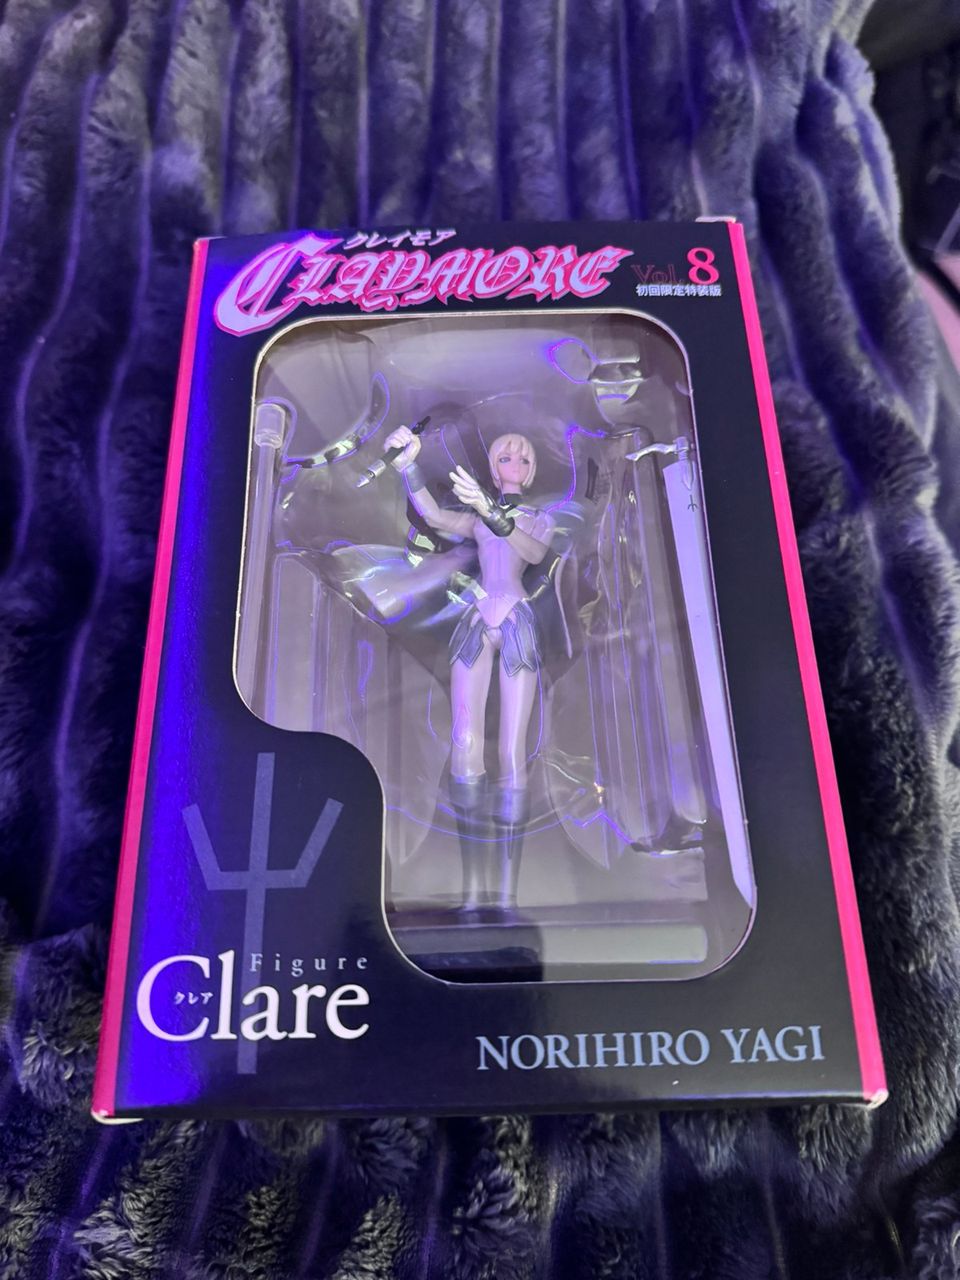 Claymore manga vol.8 Clare first limited edition figure